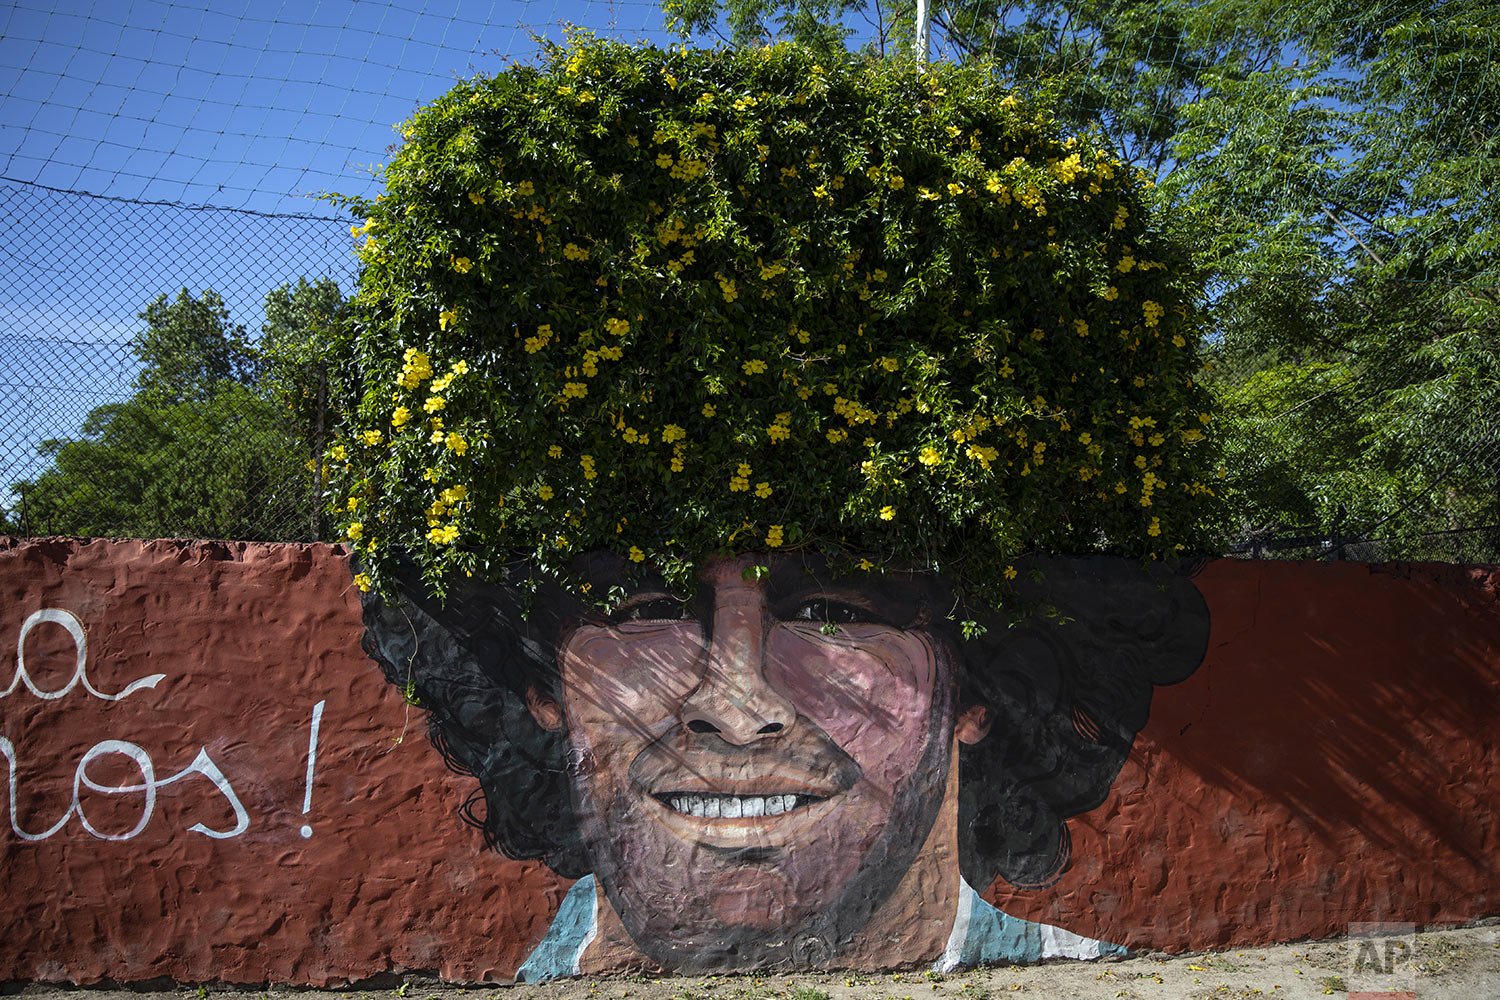  A tree grows above a mural of the late soccer star Diego Maradona at the Lugar del Sol, a charity organization helping children at risk, in Buenos Aires, Argentina, Nov. 24, 2021. Argentina marked the one-year anniversary of the death of the soccer 